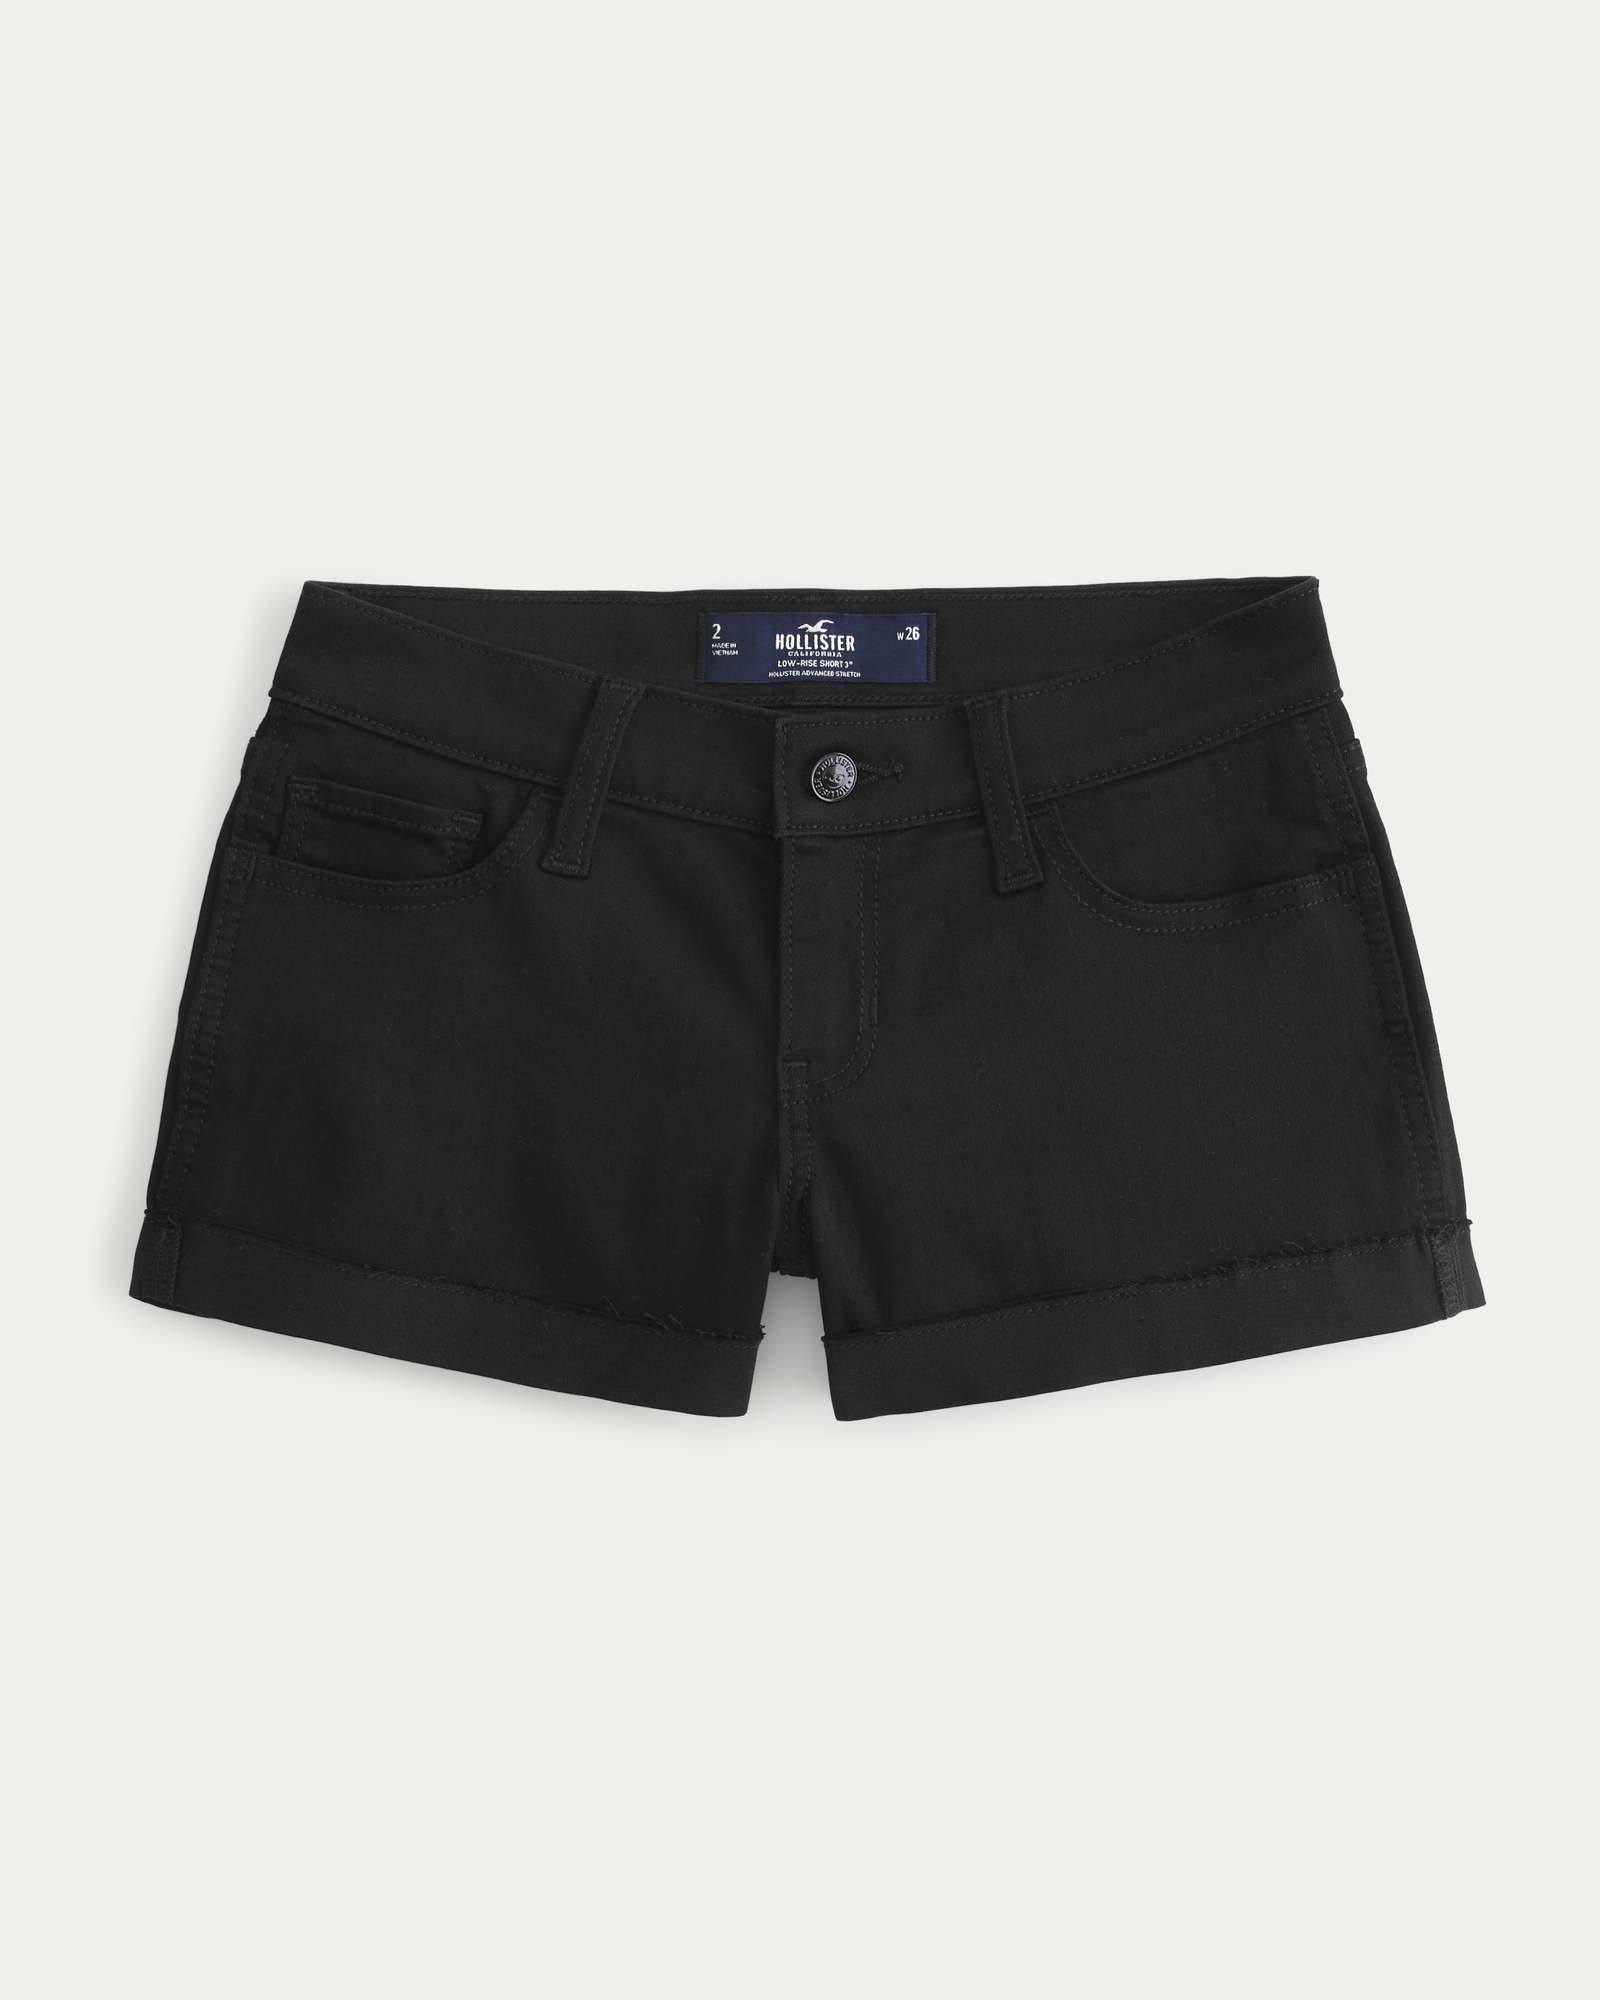 https://img.hollisterco.com/is/image/anf/KIC_349-4145-0001-975_prod1.jpg?policy=product-extra-large